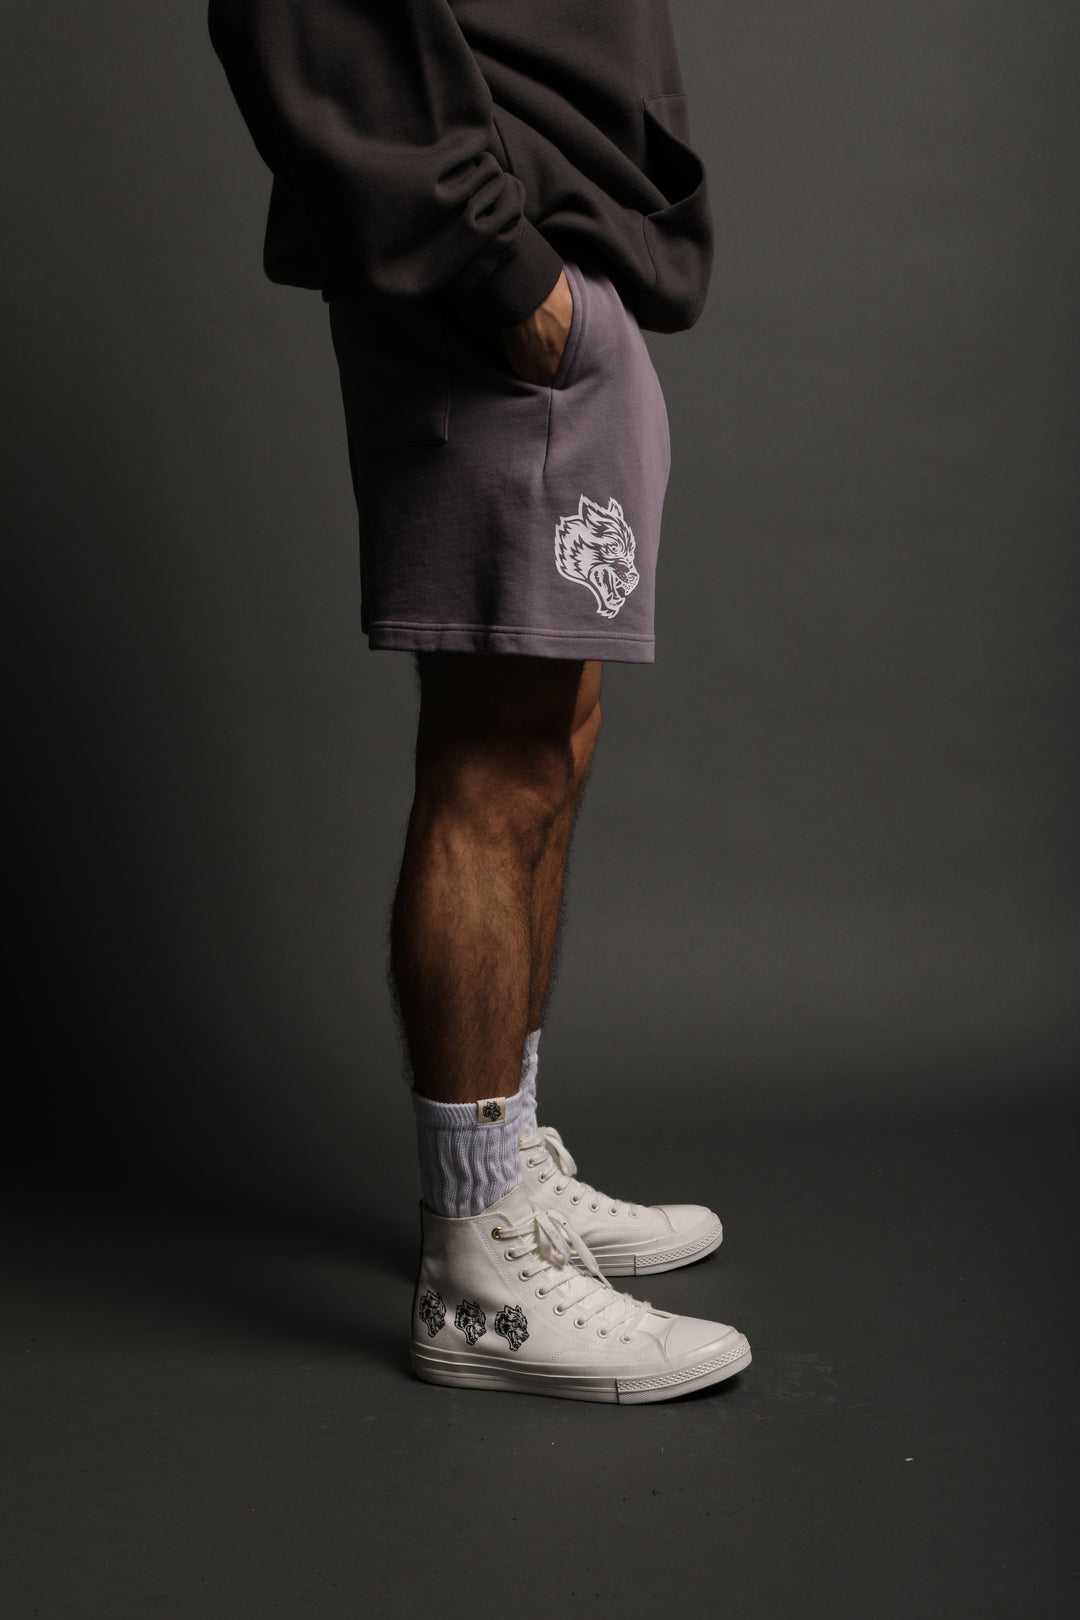 Respect Us V3 Post Lounge Sweat Shorts in Vintage Plum